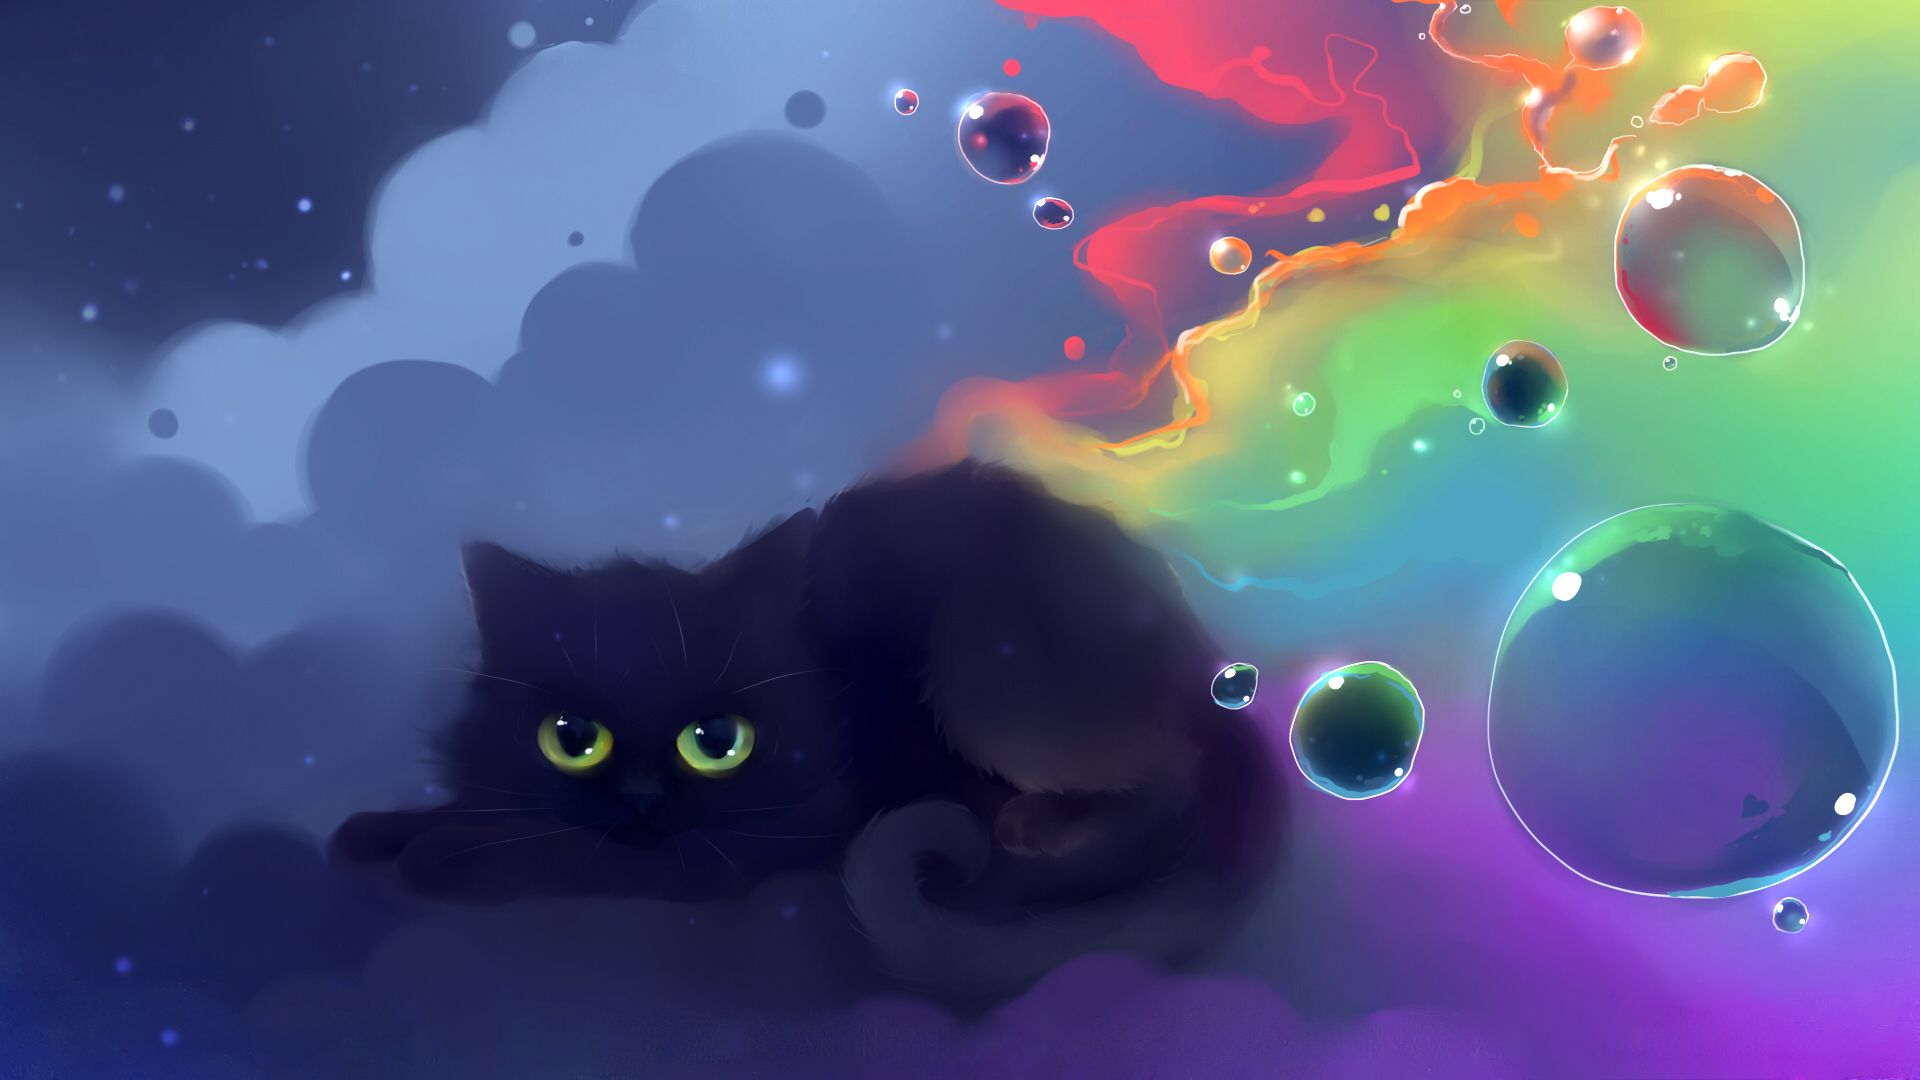 Hottest Desktop Wallpaper for Cat Lovers Picture of Cats, Cat 1920x1080